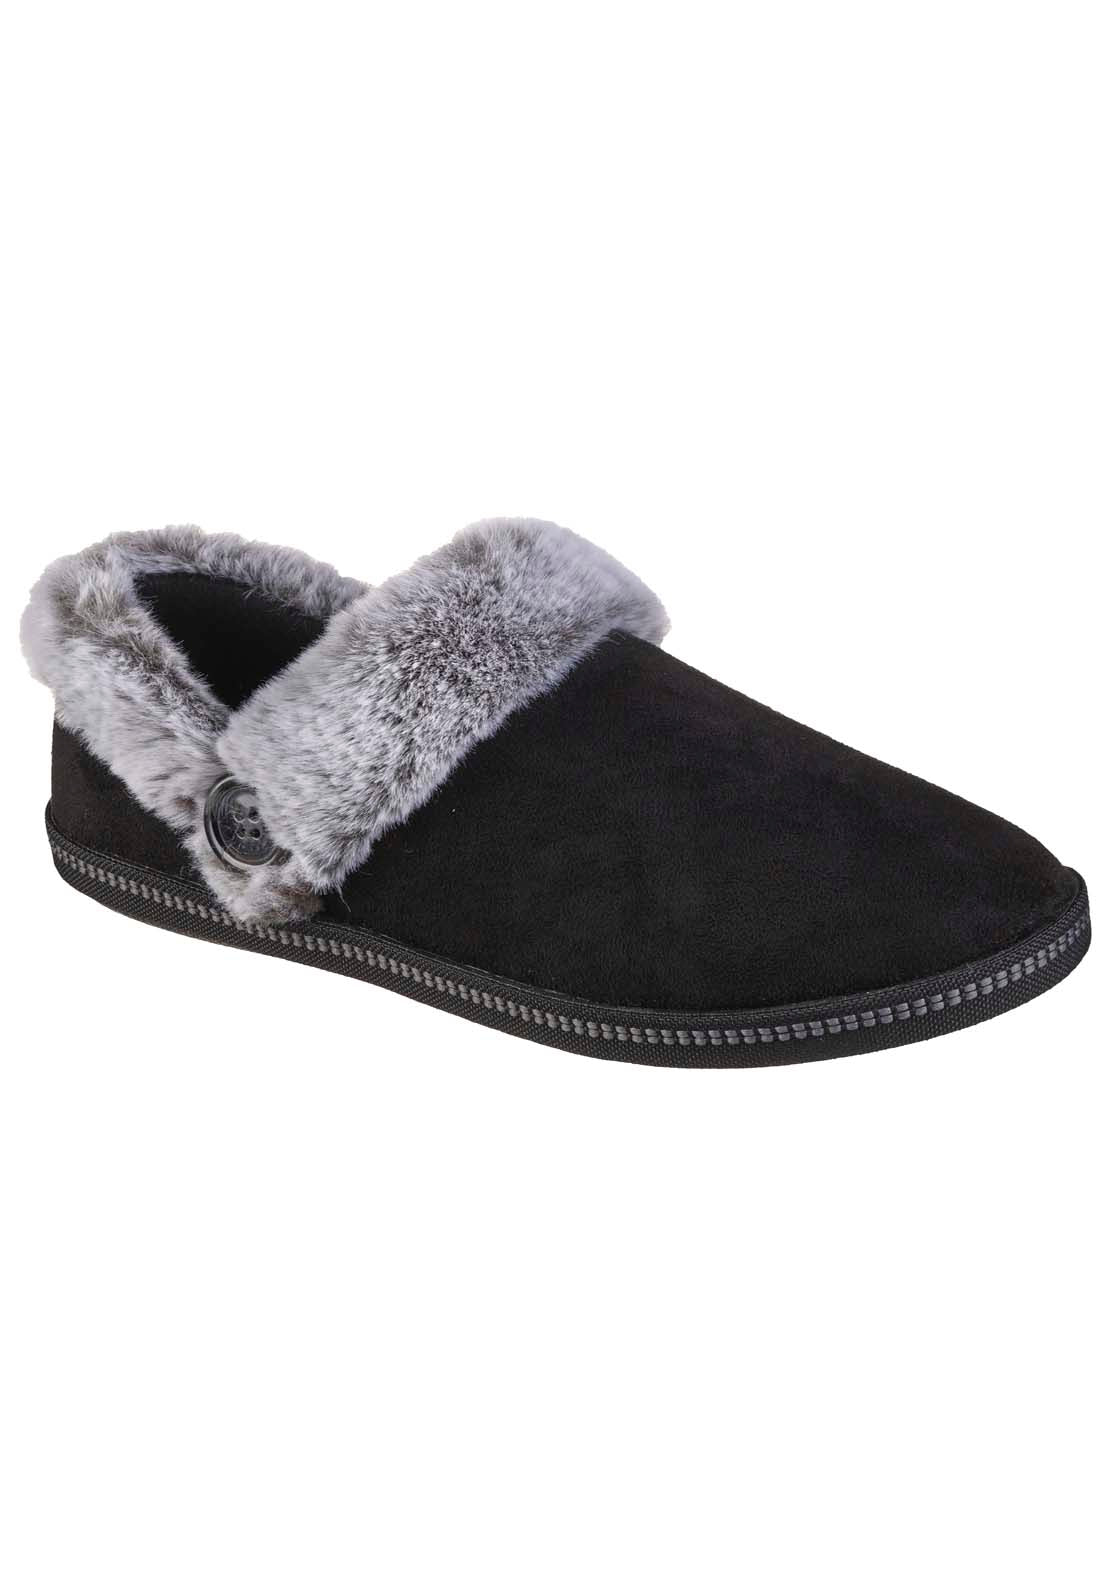 Skechers Cosy Campfire Slipper - Black 1 Shaws Department Stores